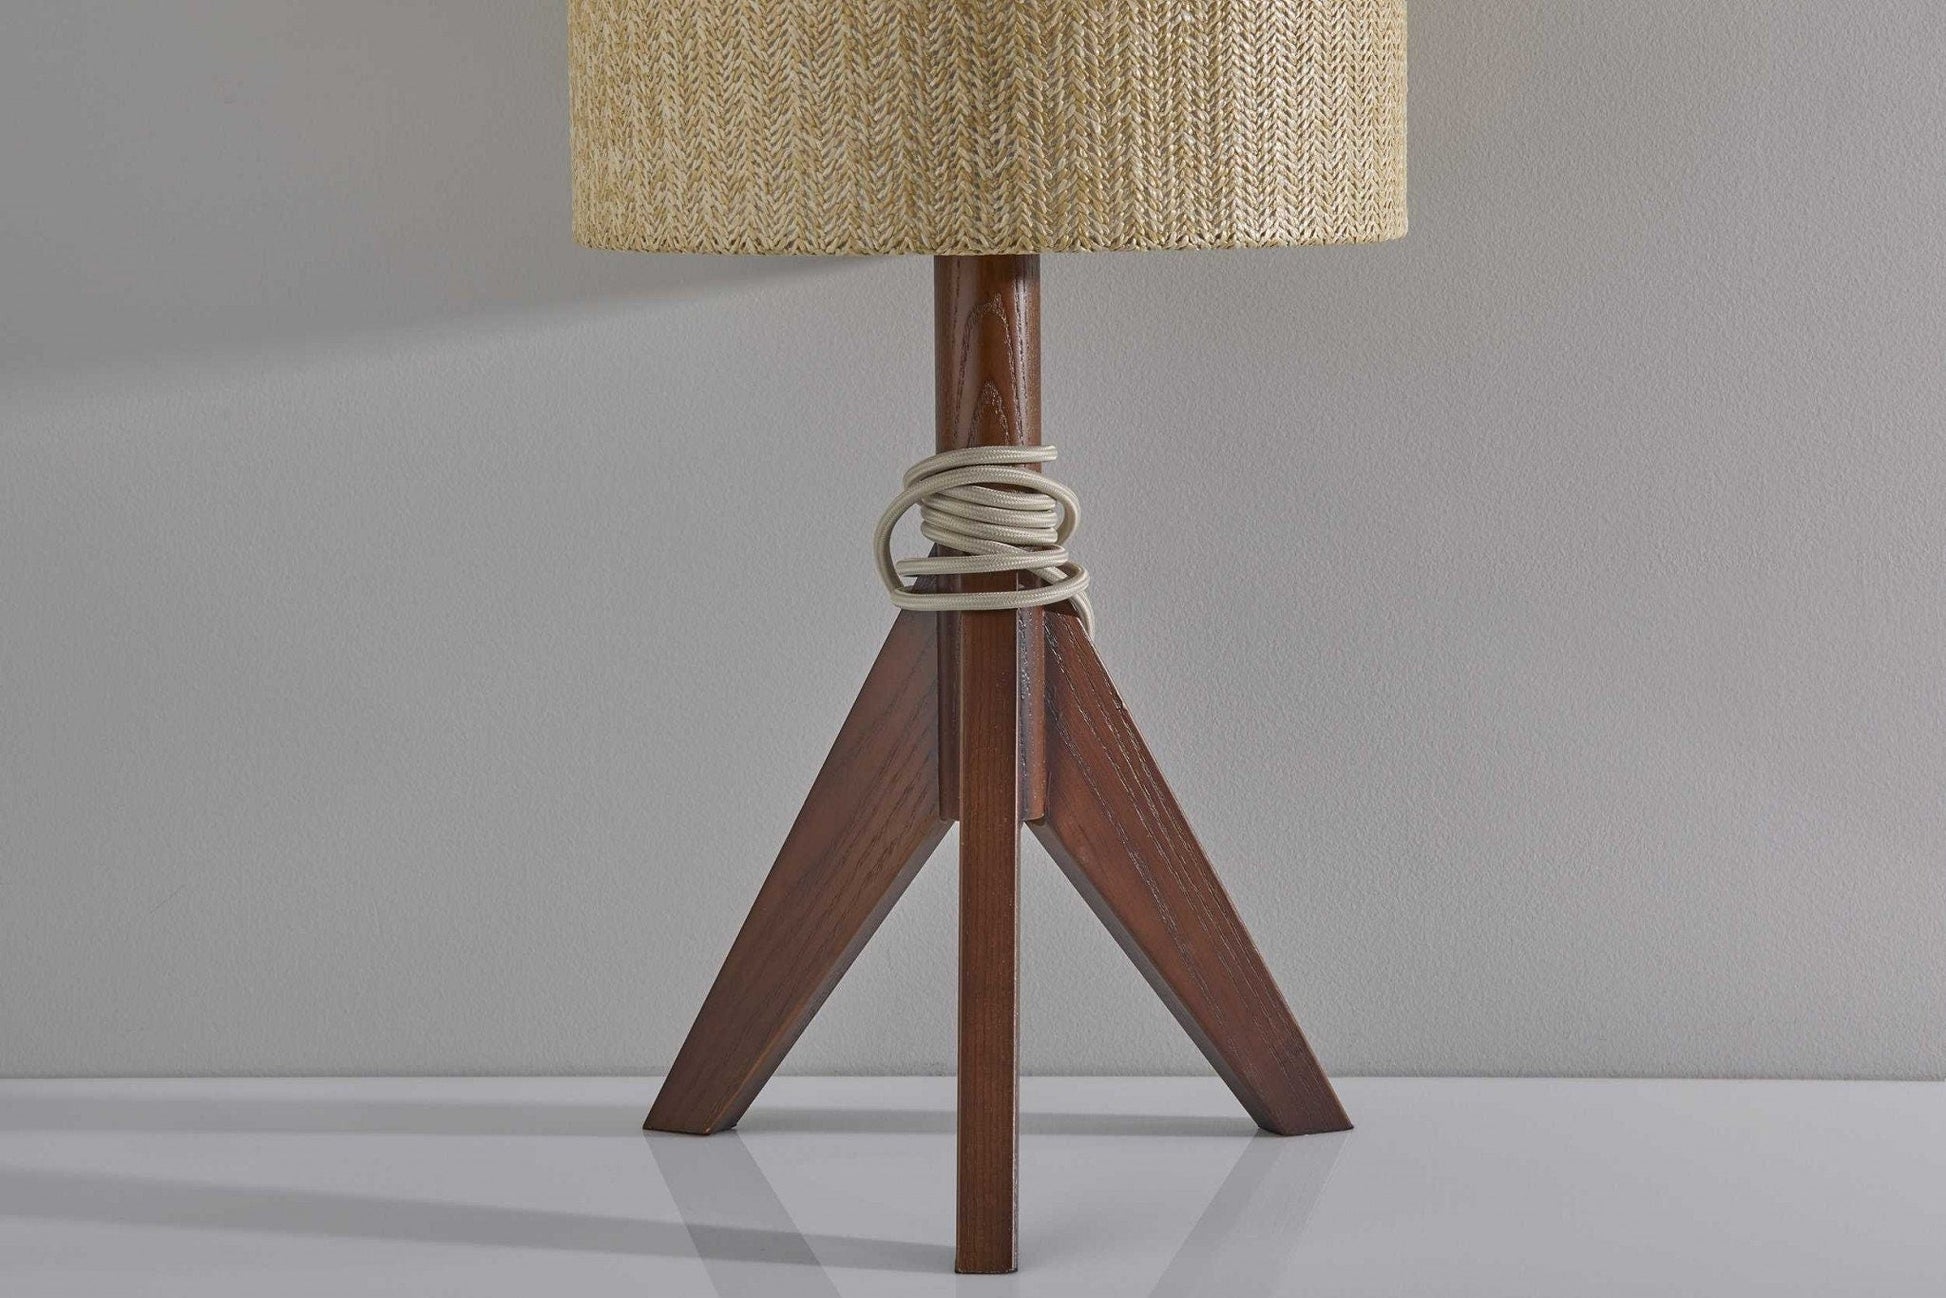 Natural Wood Tripod Base Table Lamp With Paper Shade | Mid Century Table Lamp, Japanese, Scandinavian, Desk Lamp, Bedside Light - TABLE LAMP -